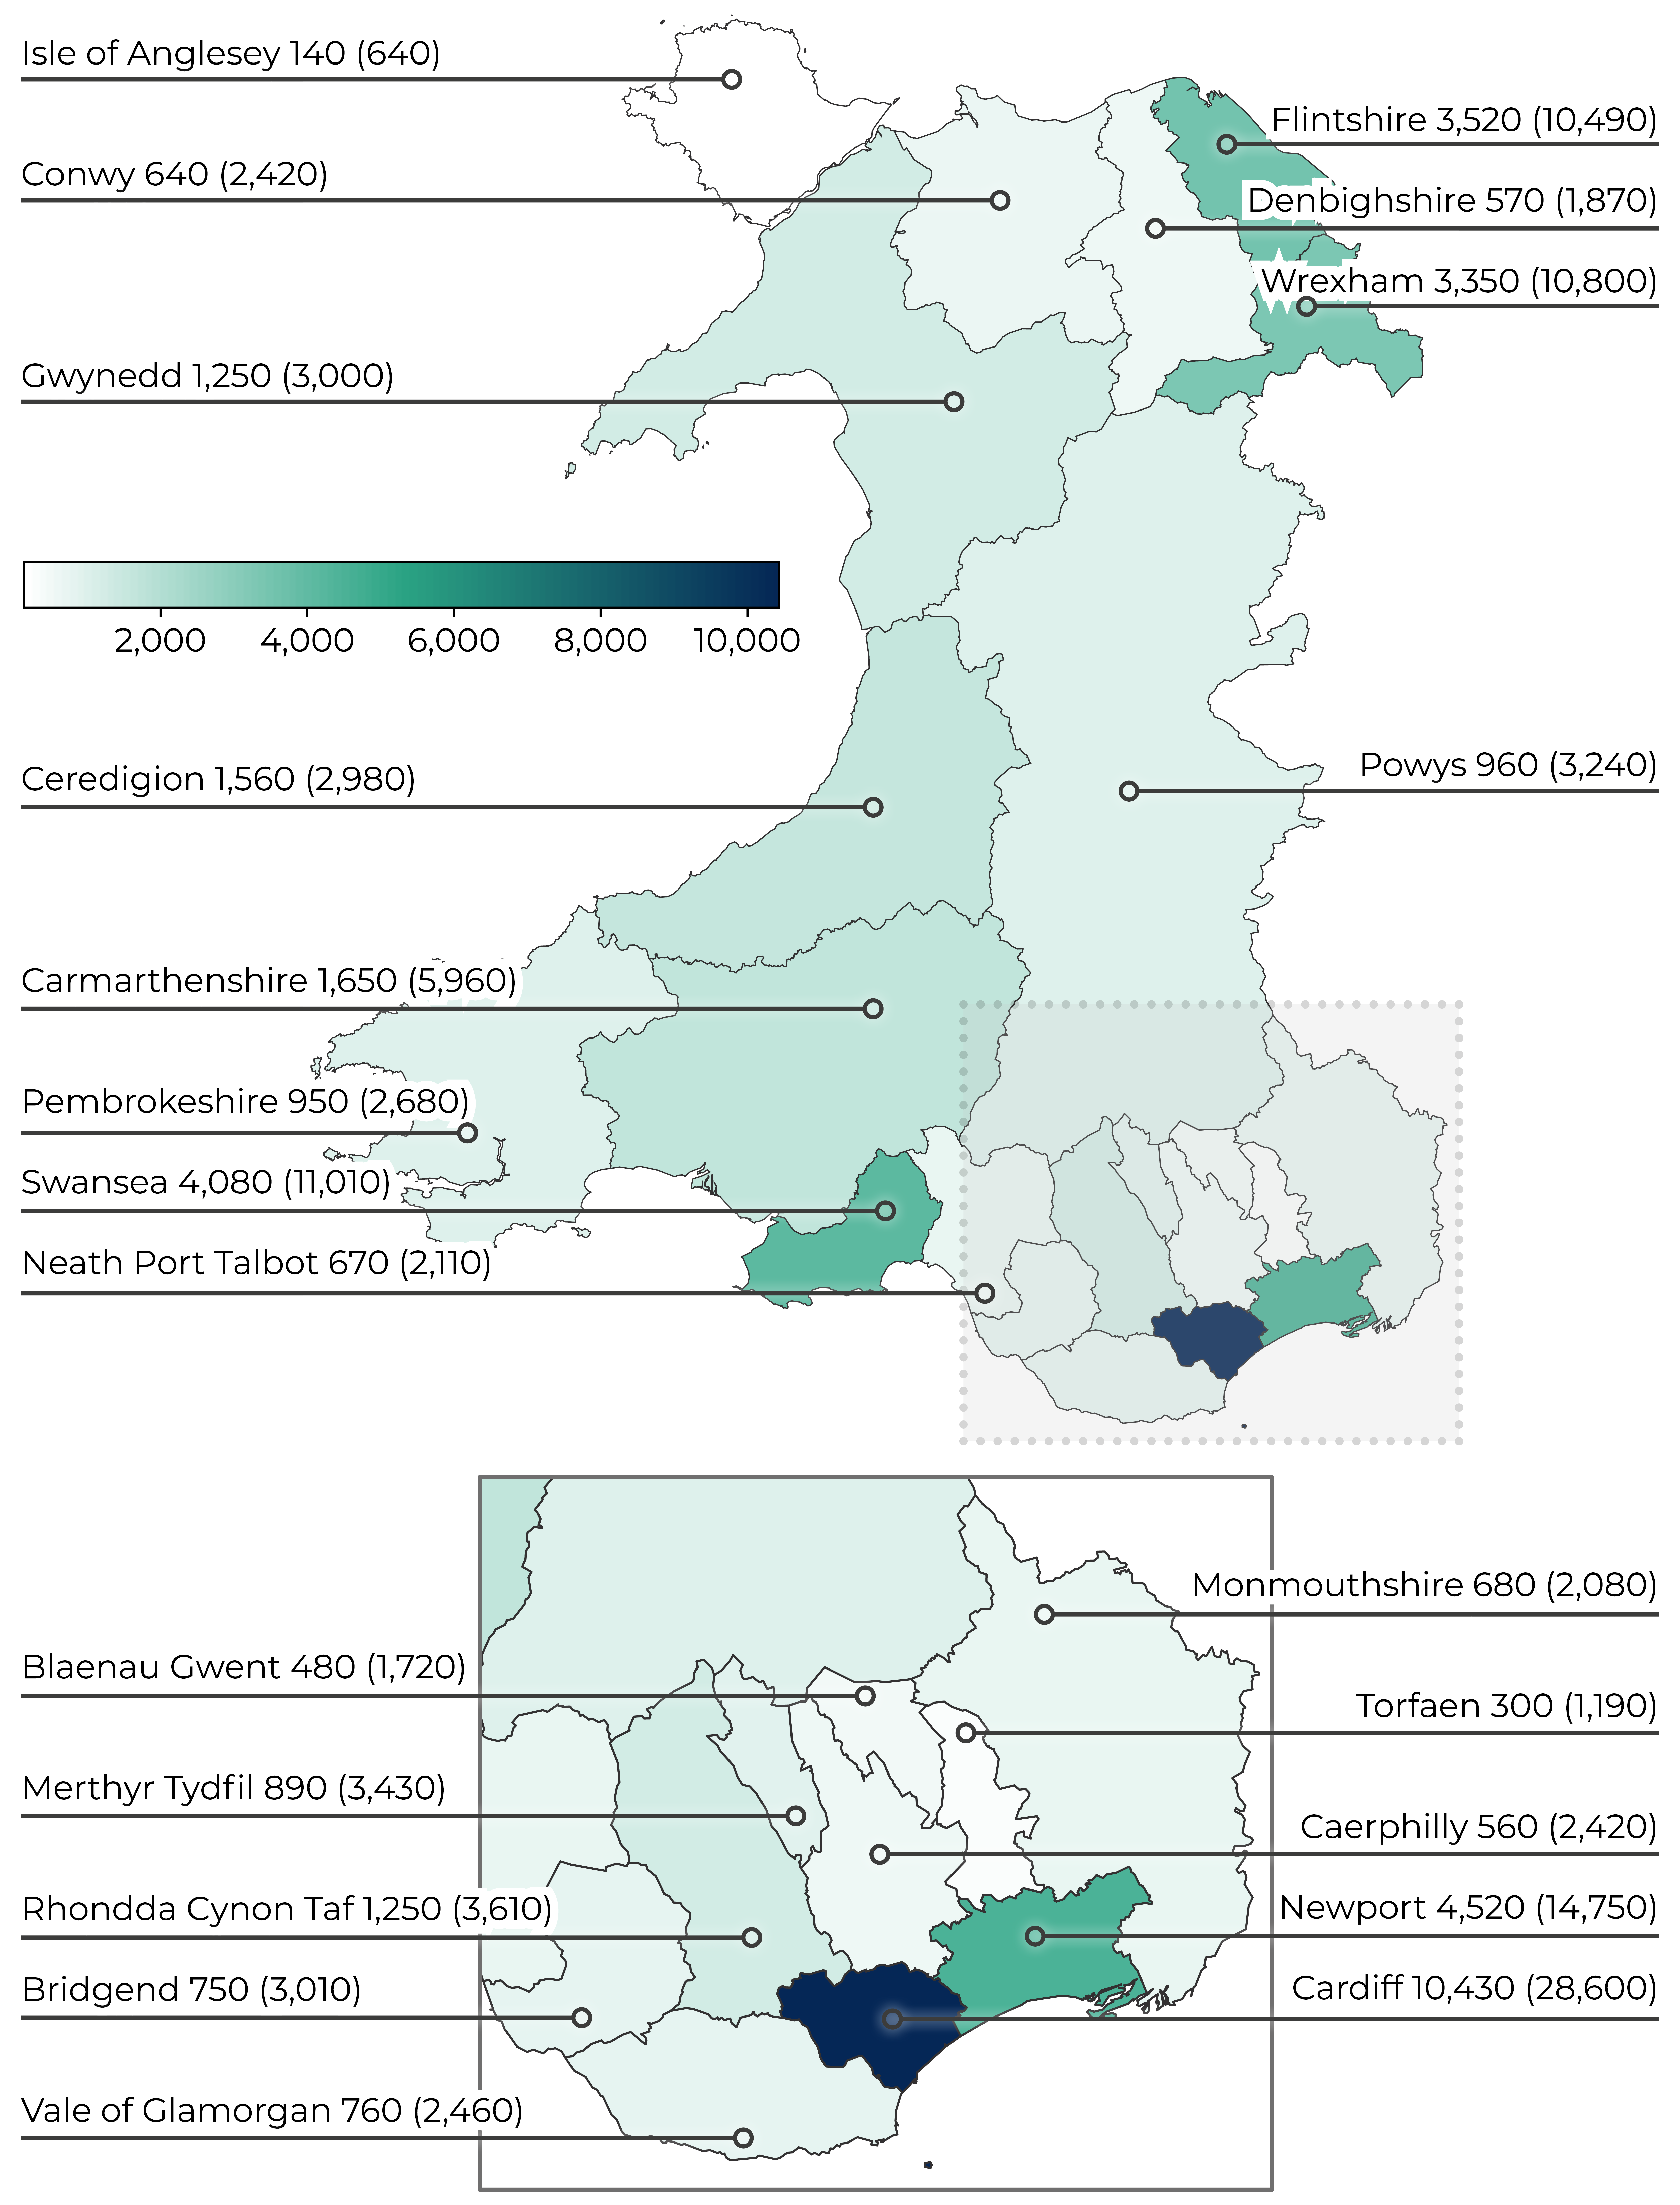 The Local Authorities with the highest number of pre-settled citizens were Cardiff (10,430 from 28,600 applications), Newport (4,520 from 14,750 applications), Swansea (4,080 from 11,010 applications), Flintshire (3,520 from 10,490 applications), and Wrexham (3,350 from 10,800 applications). Other Local Authorities varied between 140 to 1,650 pre-settled citizens.